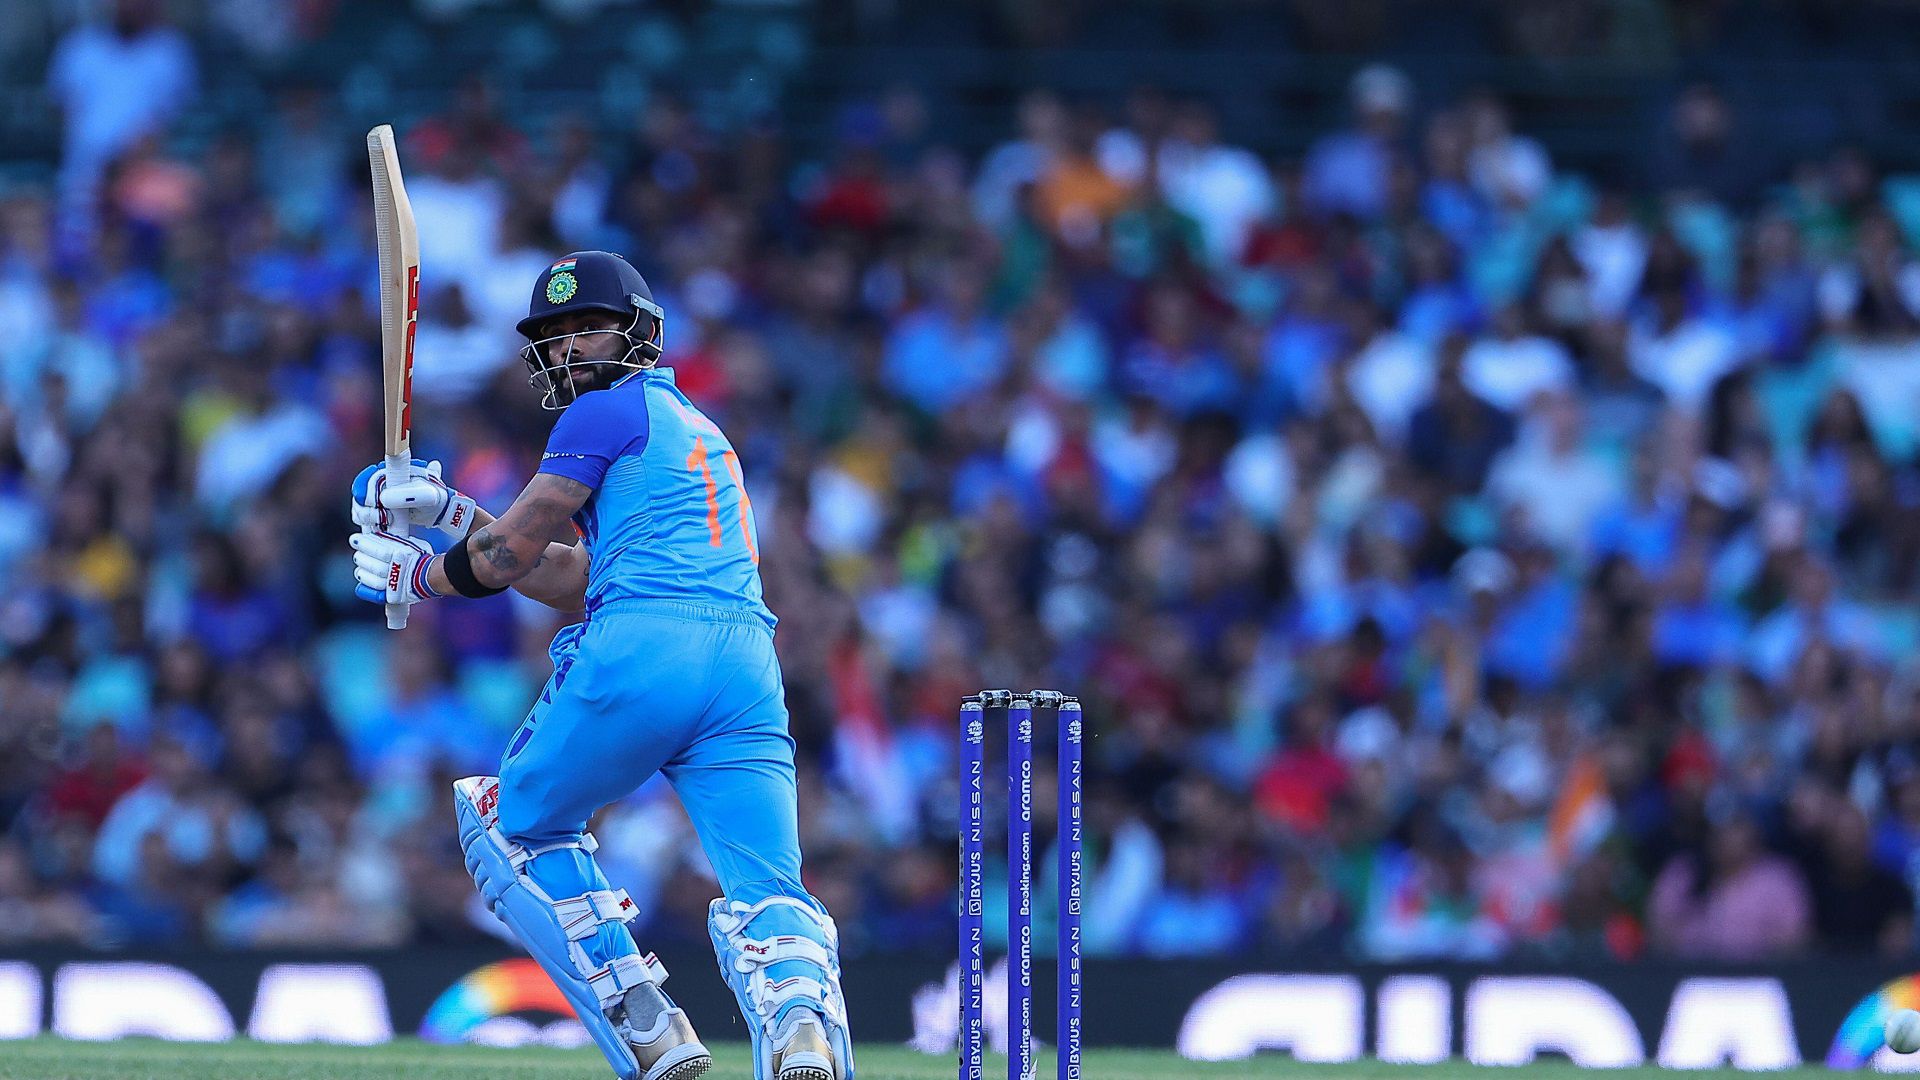 India vs England predictions: Adelaide helps give India the edge